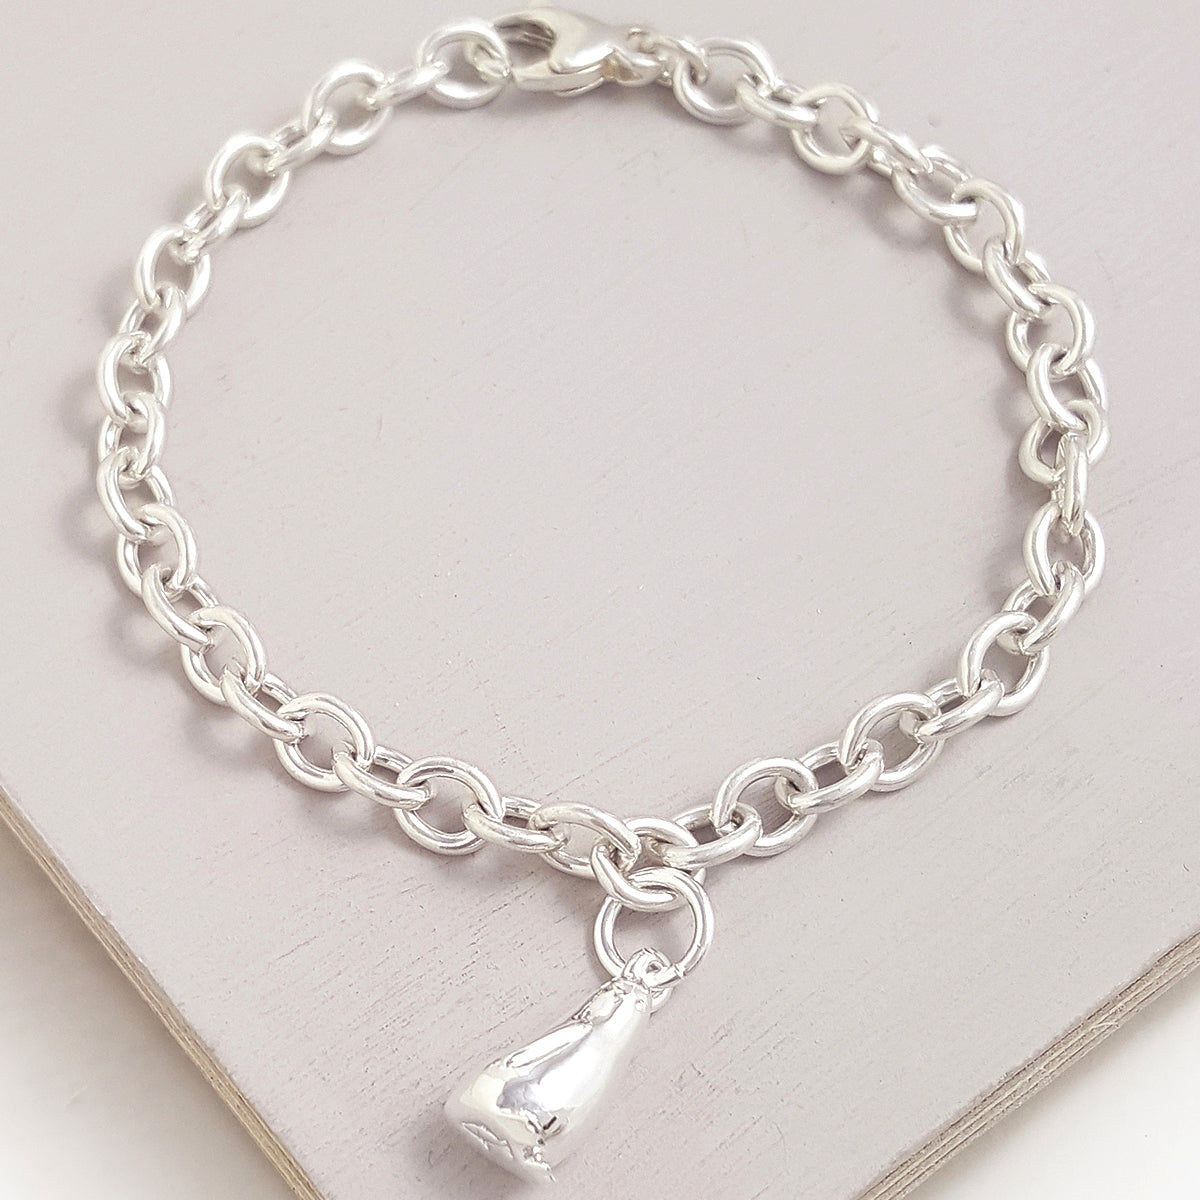 Silver Penguin Bracelet Charm with perfect detail free UK delivery